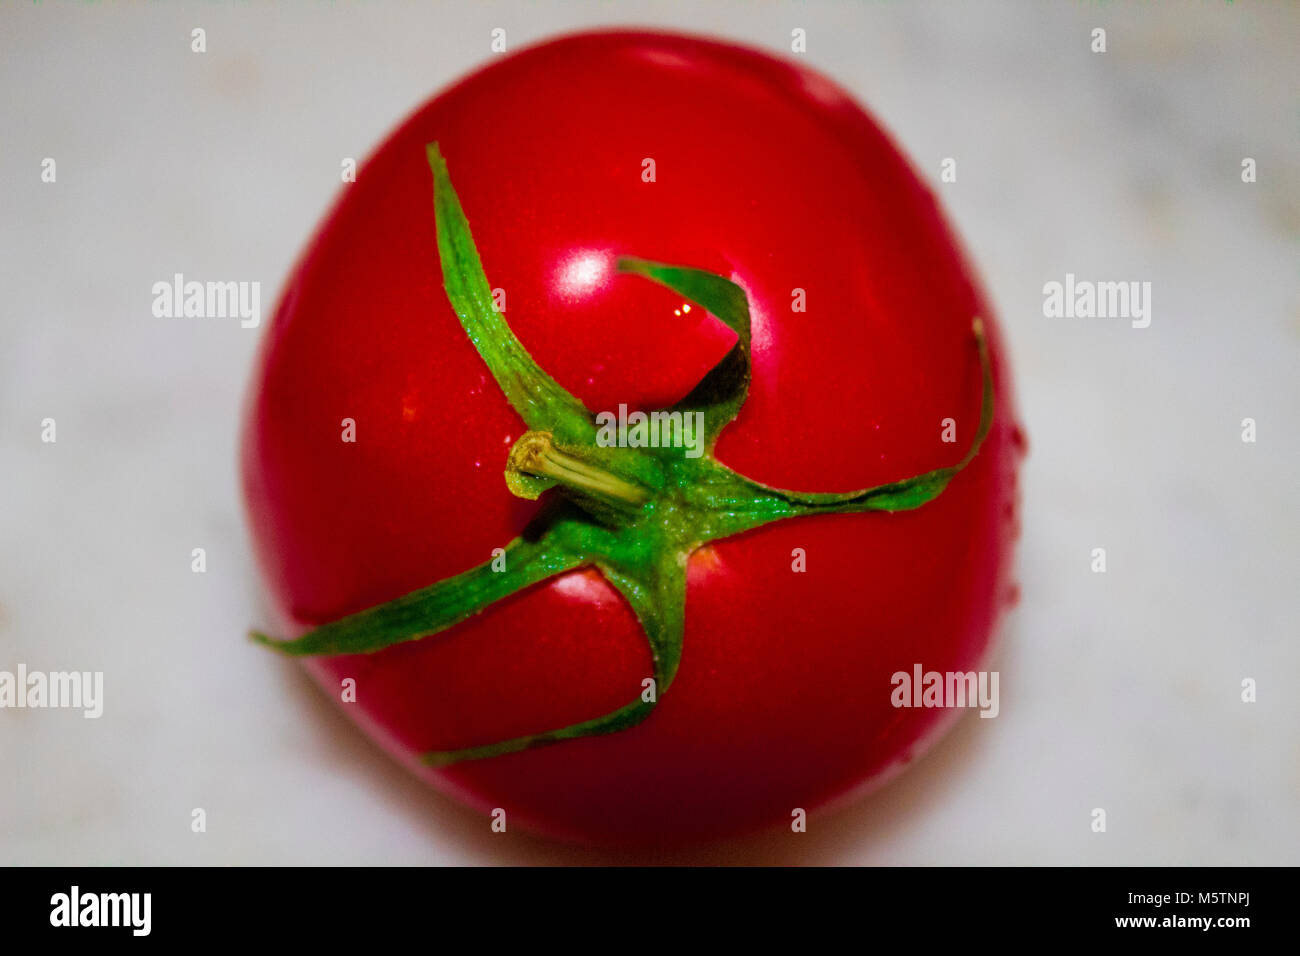 It is a tomato Stock Photo